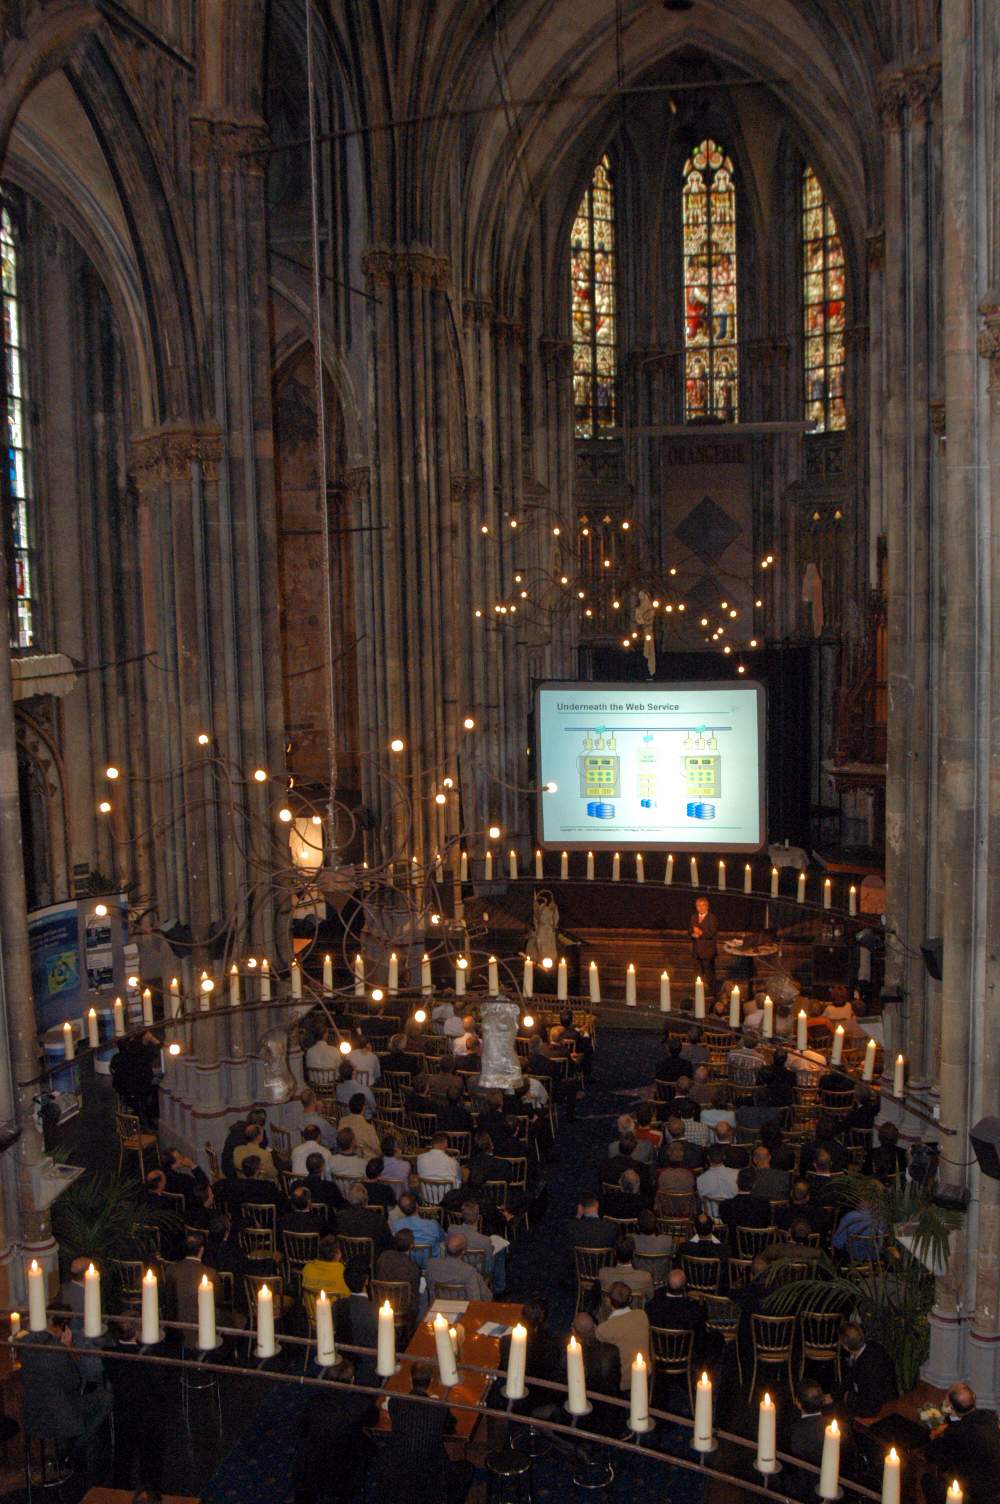 Compuware Customer Technology Briefing / Face 2 Face16 september 2004 - Orangerie Den BoschFoto door Erik van Roon
[#Beginning of Shooting Data Section]Nikon D100 
Focal Length: 24mm
White Balance: Auto
Color Mode: Mode I (sRGB)
2004/09/16 14:42:48.9
Exposure Mode: Aperture Priority
AF Mode: AF-S
Hue Adjustment: 0°
JPEG (8-bit) Fine
Metering Mode: Center-Weighted
Tone Comp: Auto
Sharpening: Auto
Image Size:  Large (3008 x 2000)
1/15 sec - f/6.3
Flash Sync Mode: Slow Sync
Noise Reduction: OFF
Exposure Comp.: 0 EV
Auto Flash Mode: D-TTL
Image Comment:                                     
[#End of Shooting Data Section]